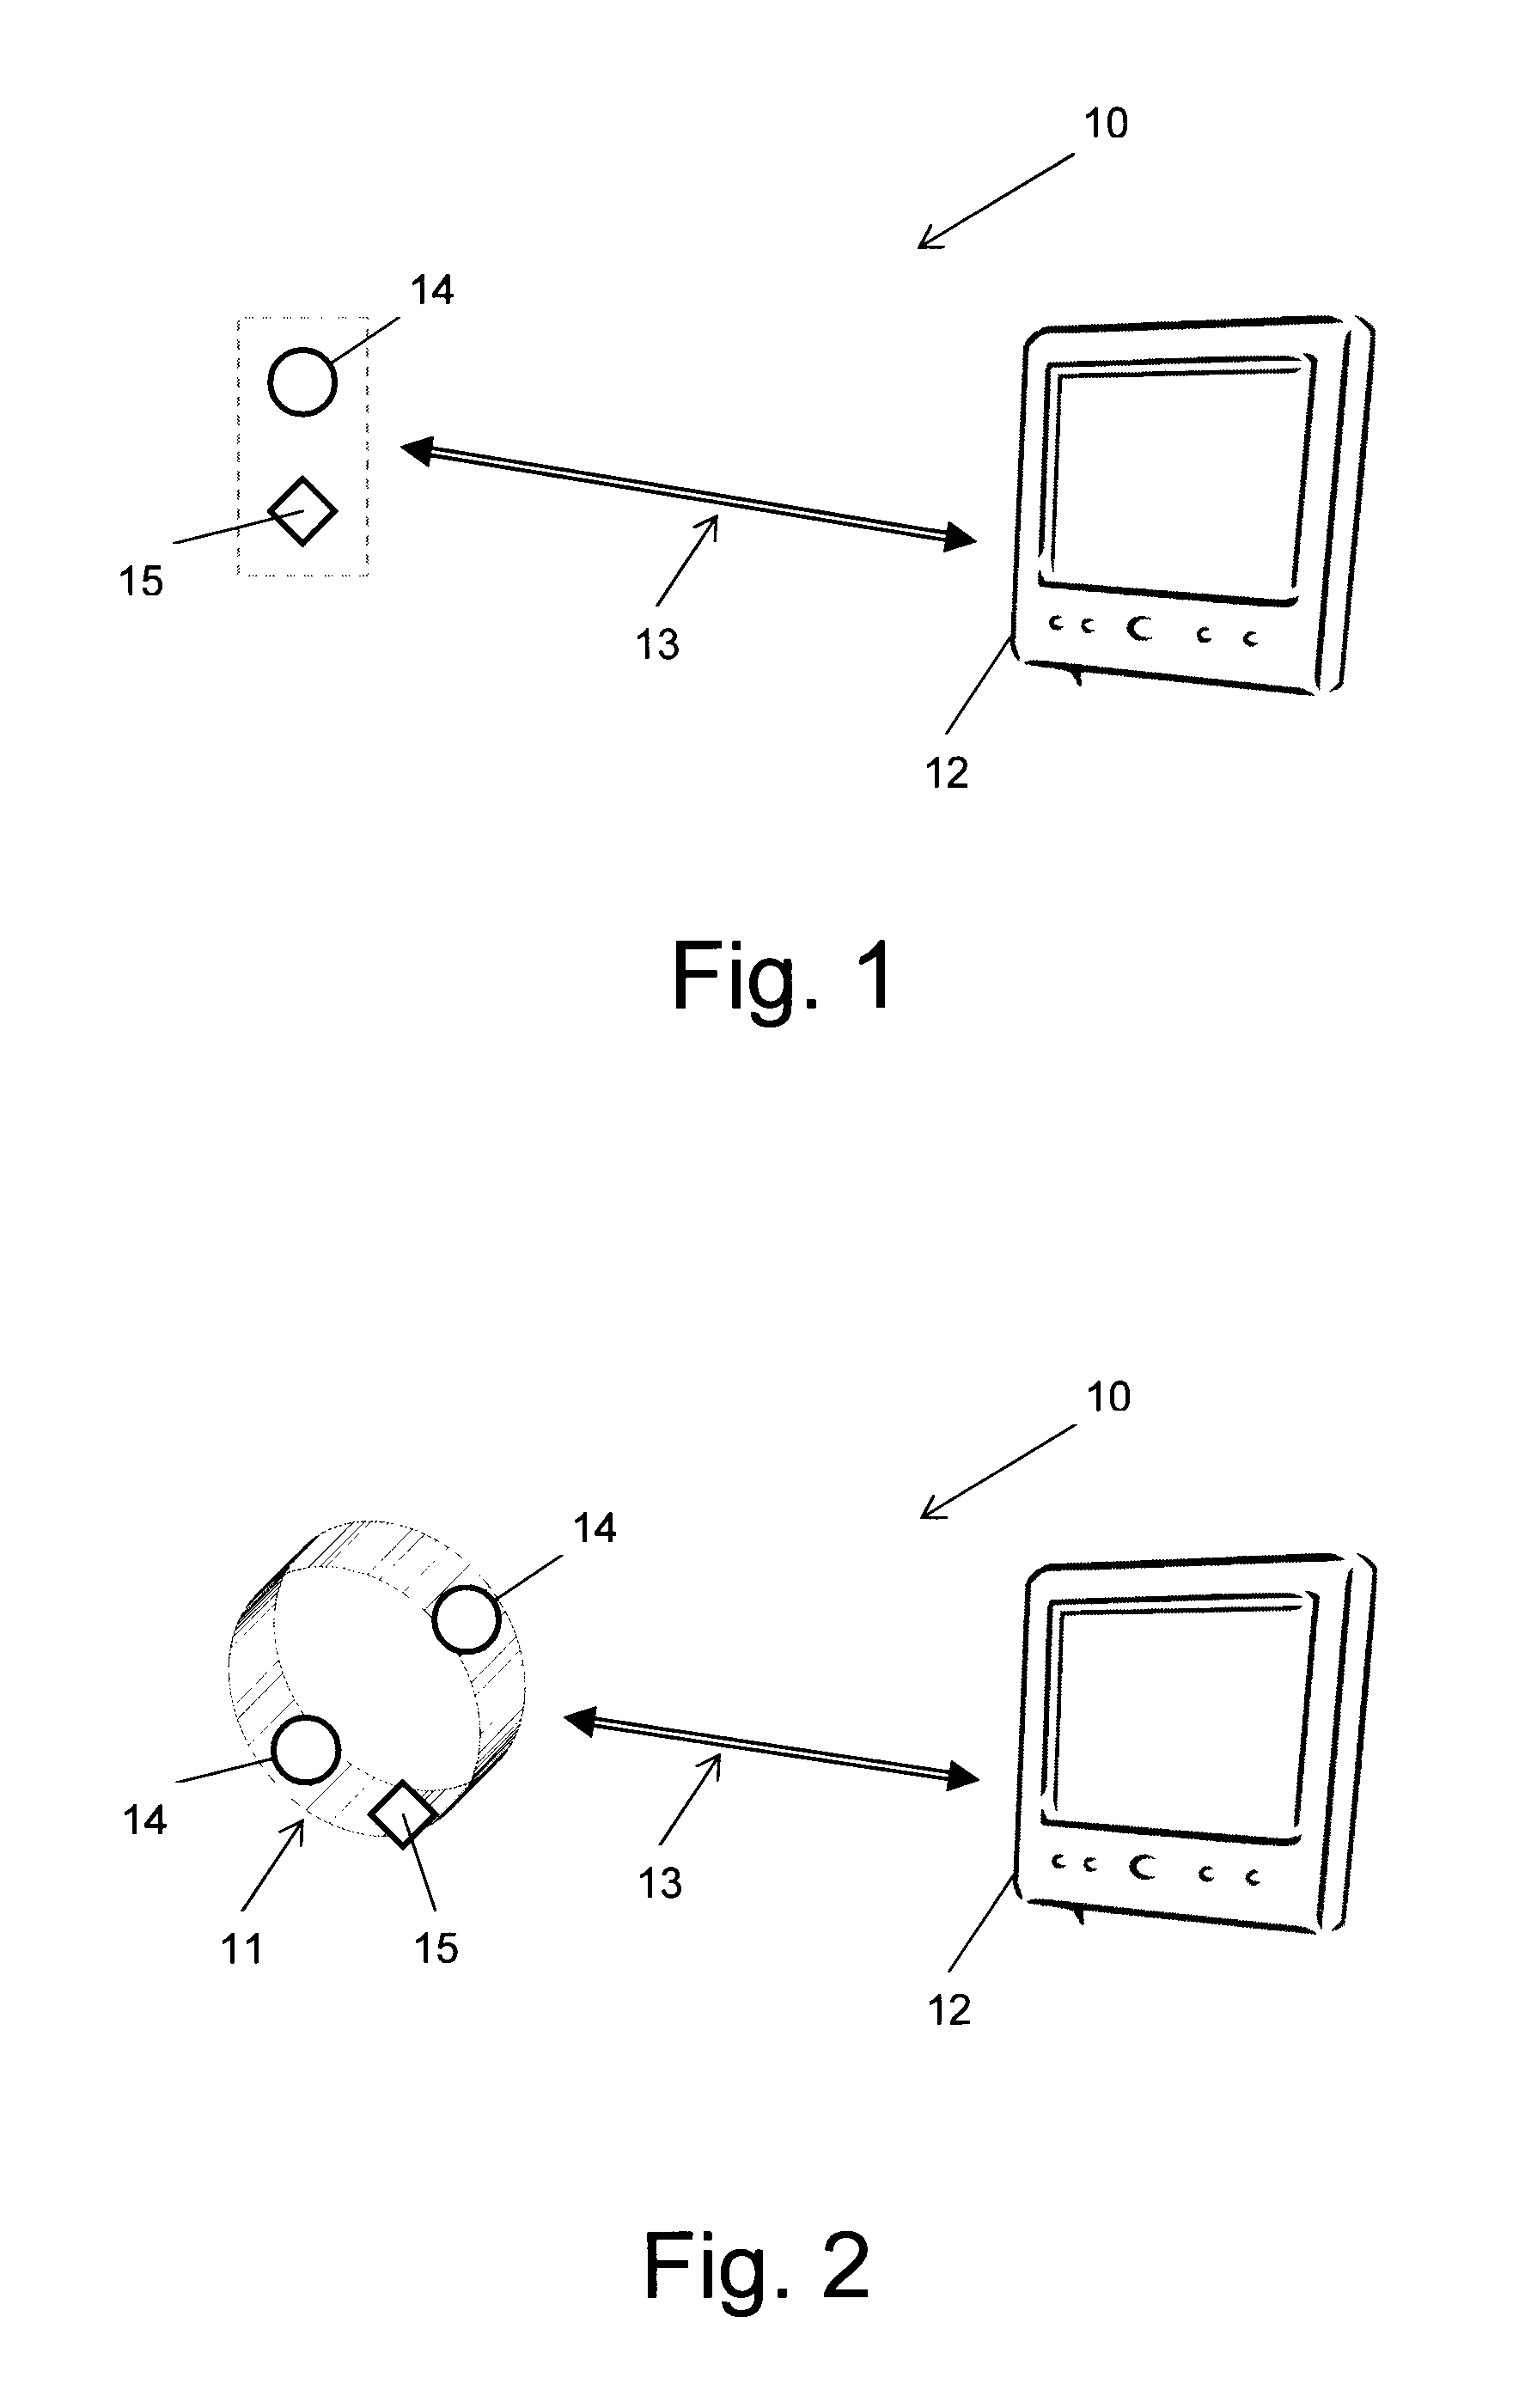 System for monitoring the coolant level and the temperature of an internal combustion engine